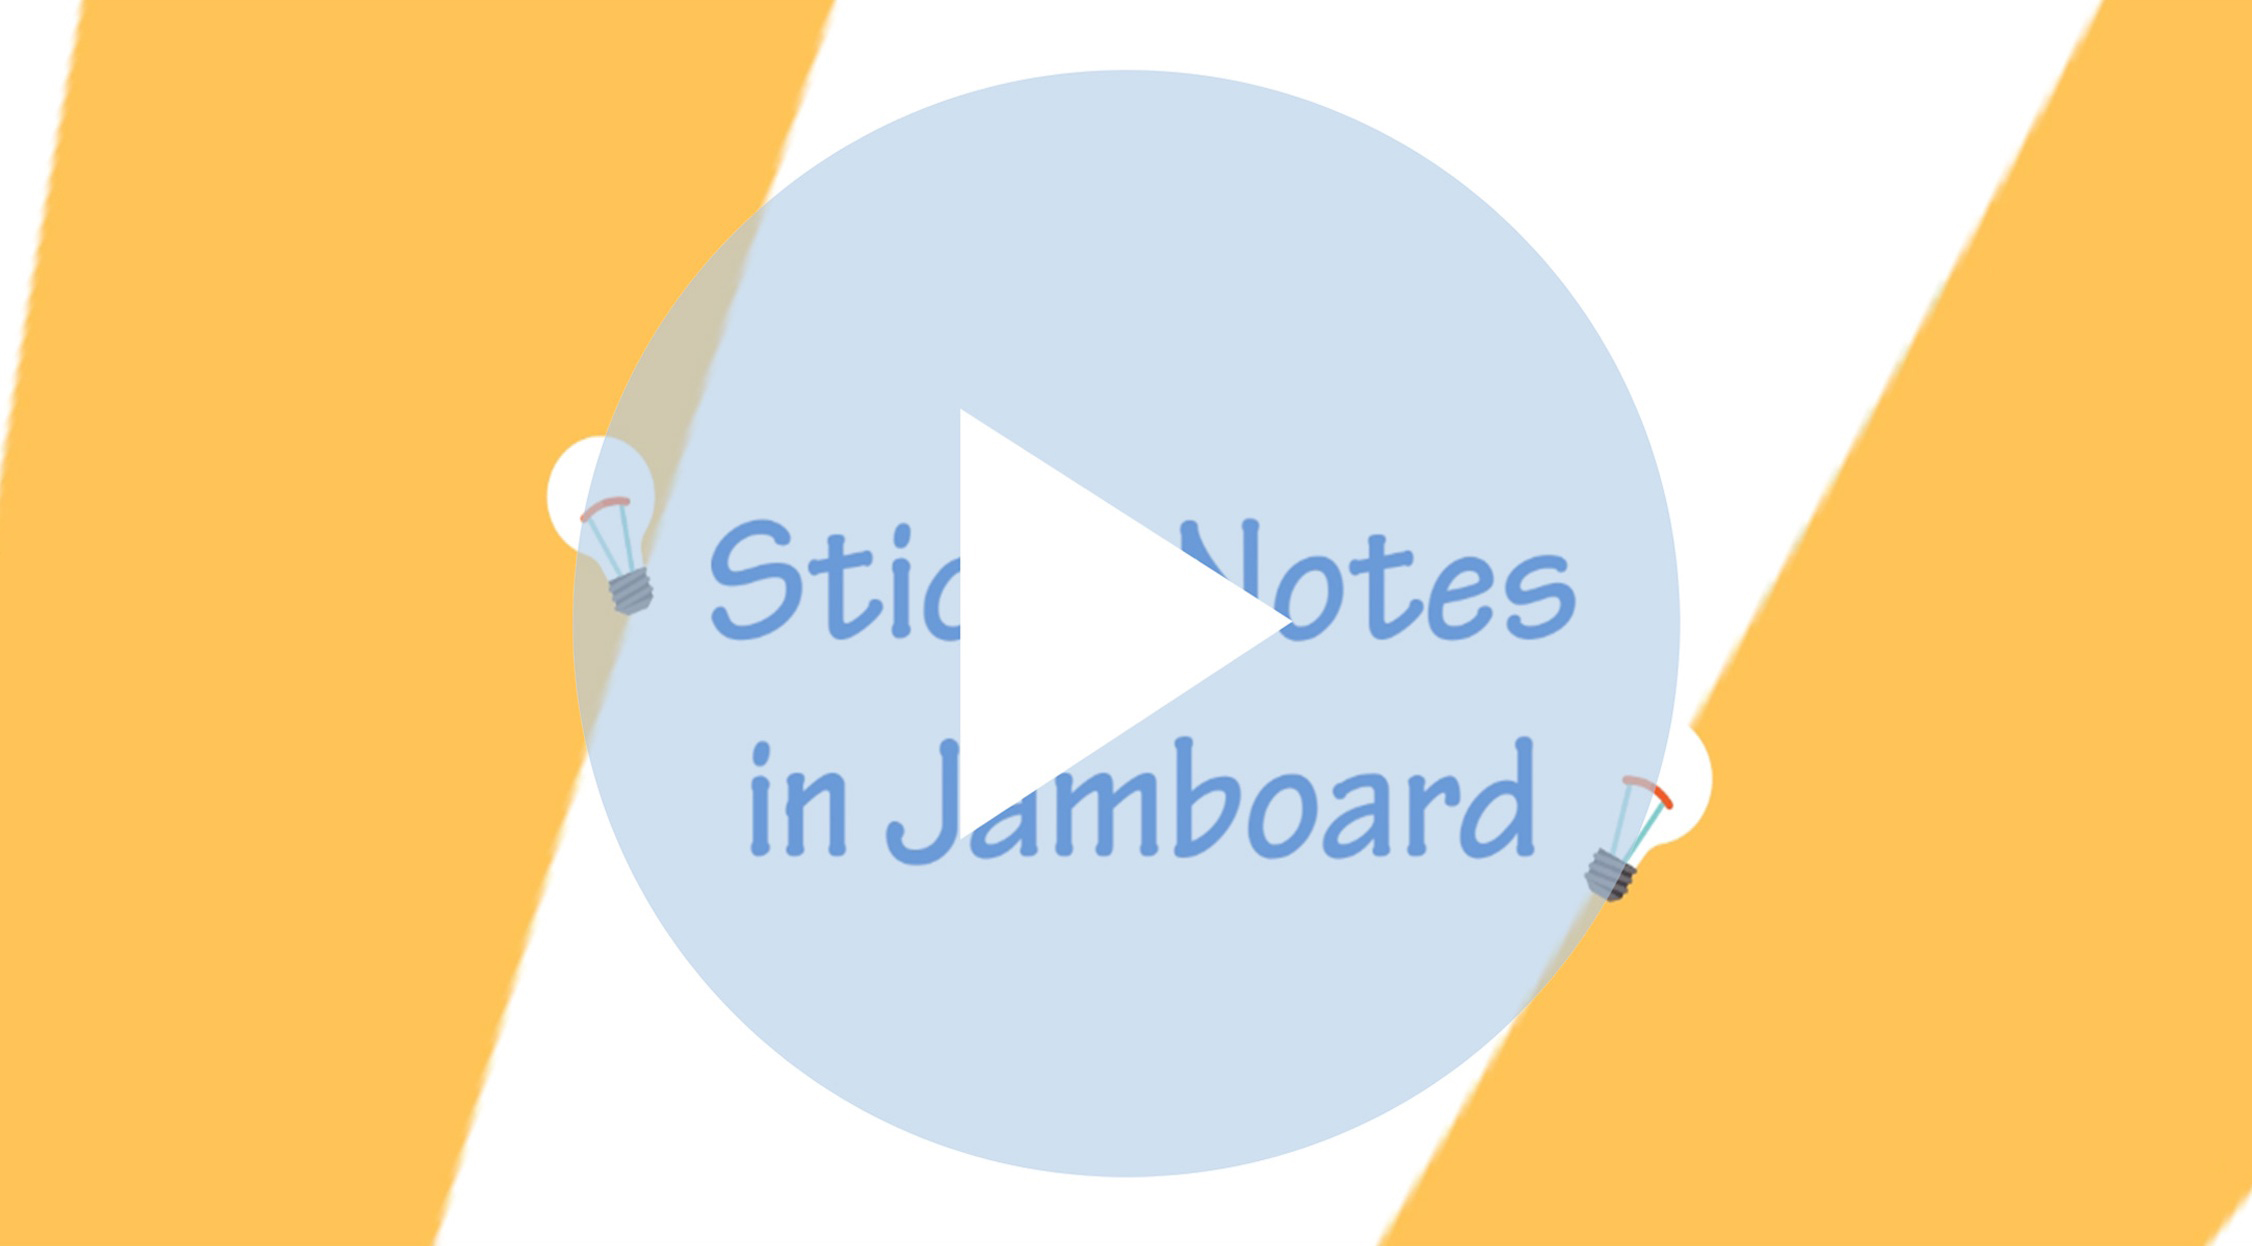 Sticky Notes in Jamboard